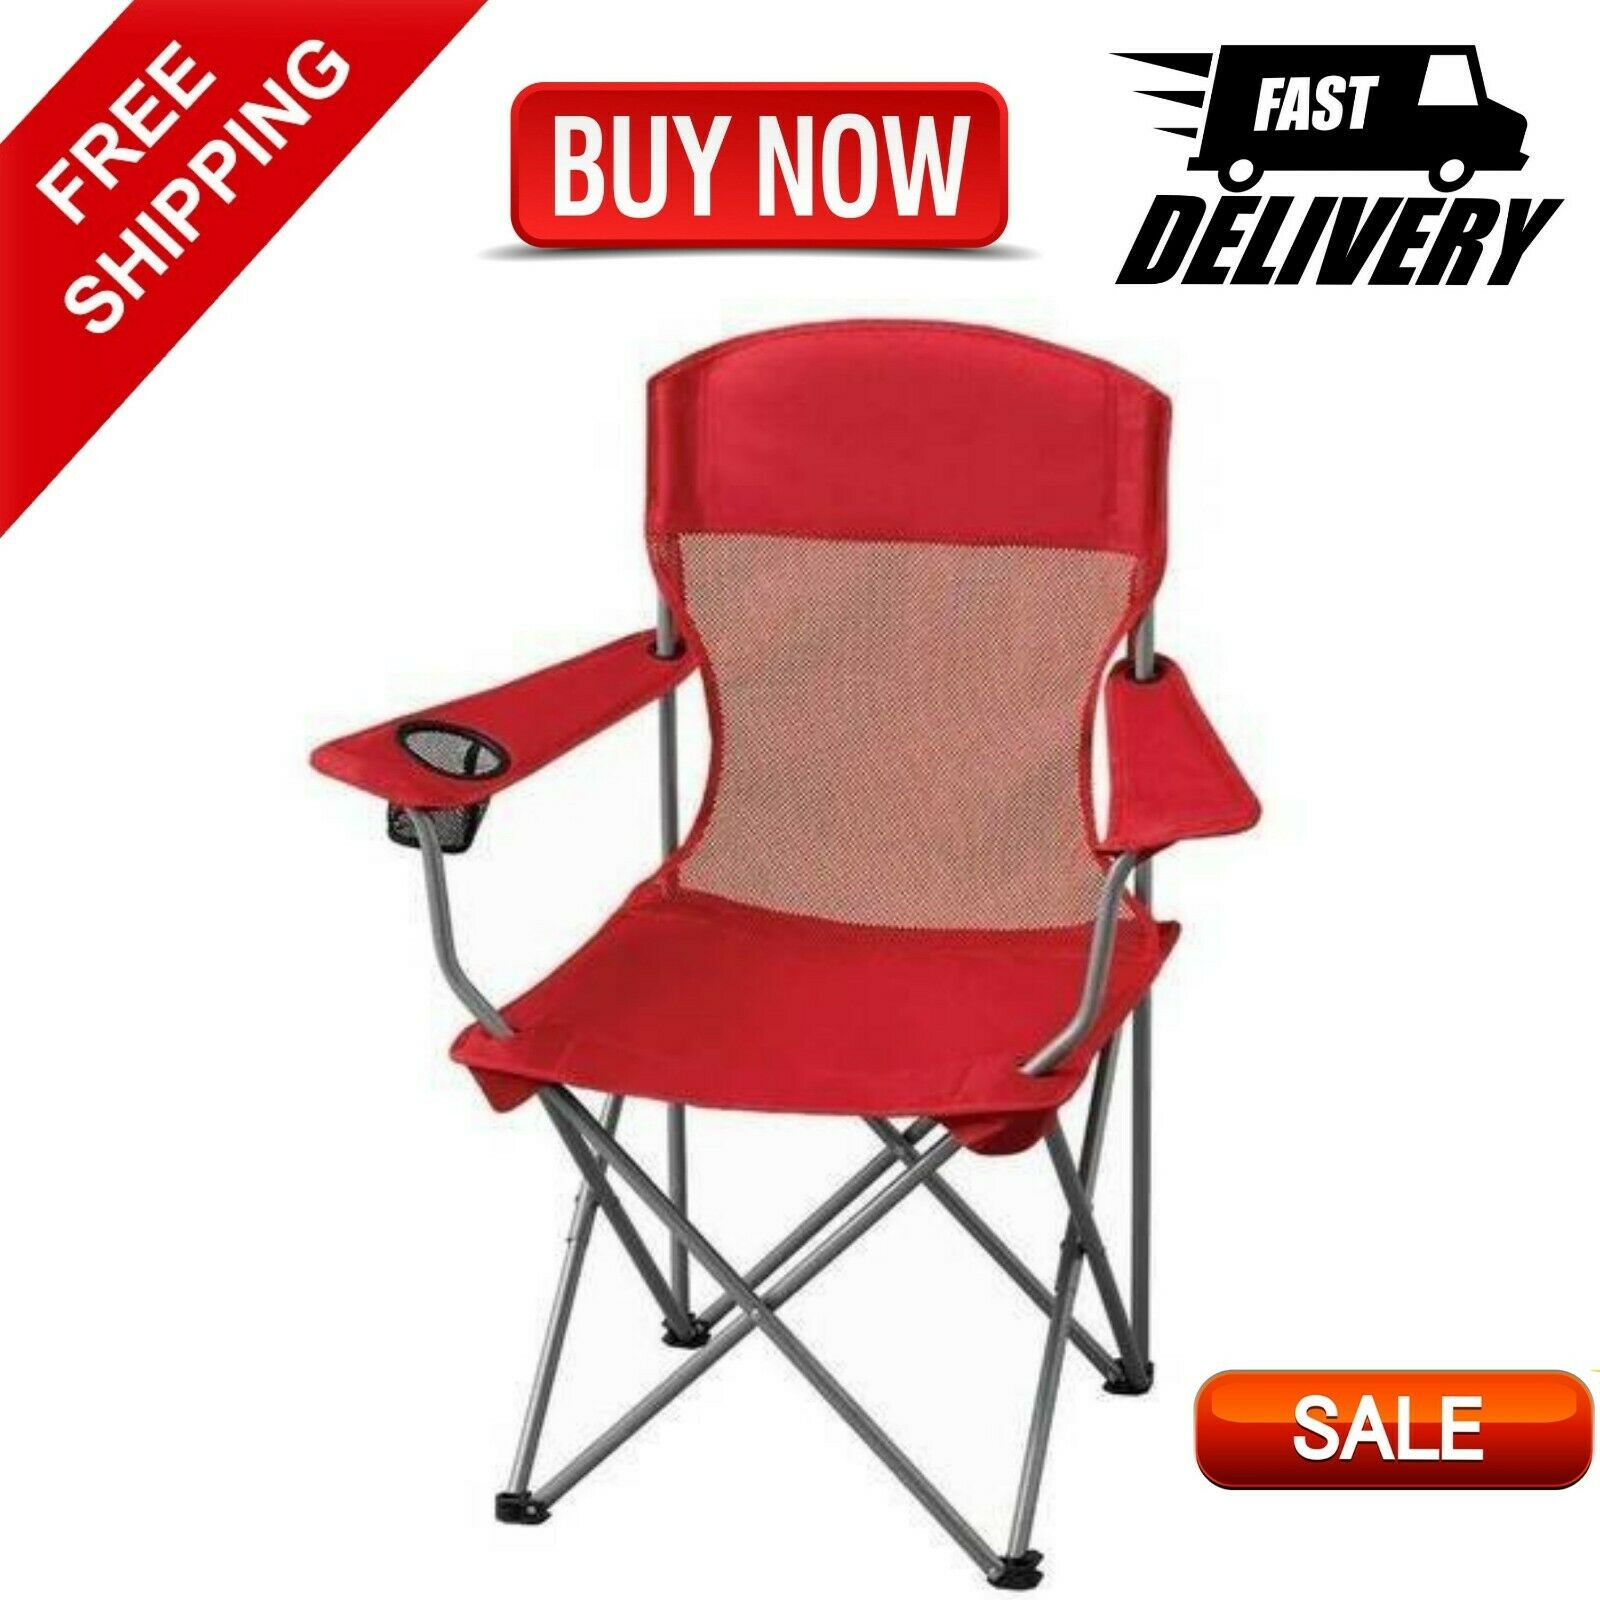 Basic Mesh Folding Camp Chair W/ Cup Holder Lightweight Camping Chair Red